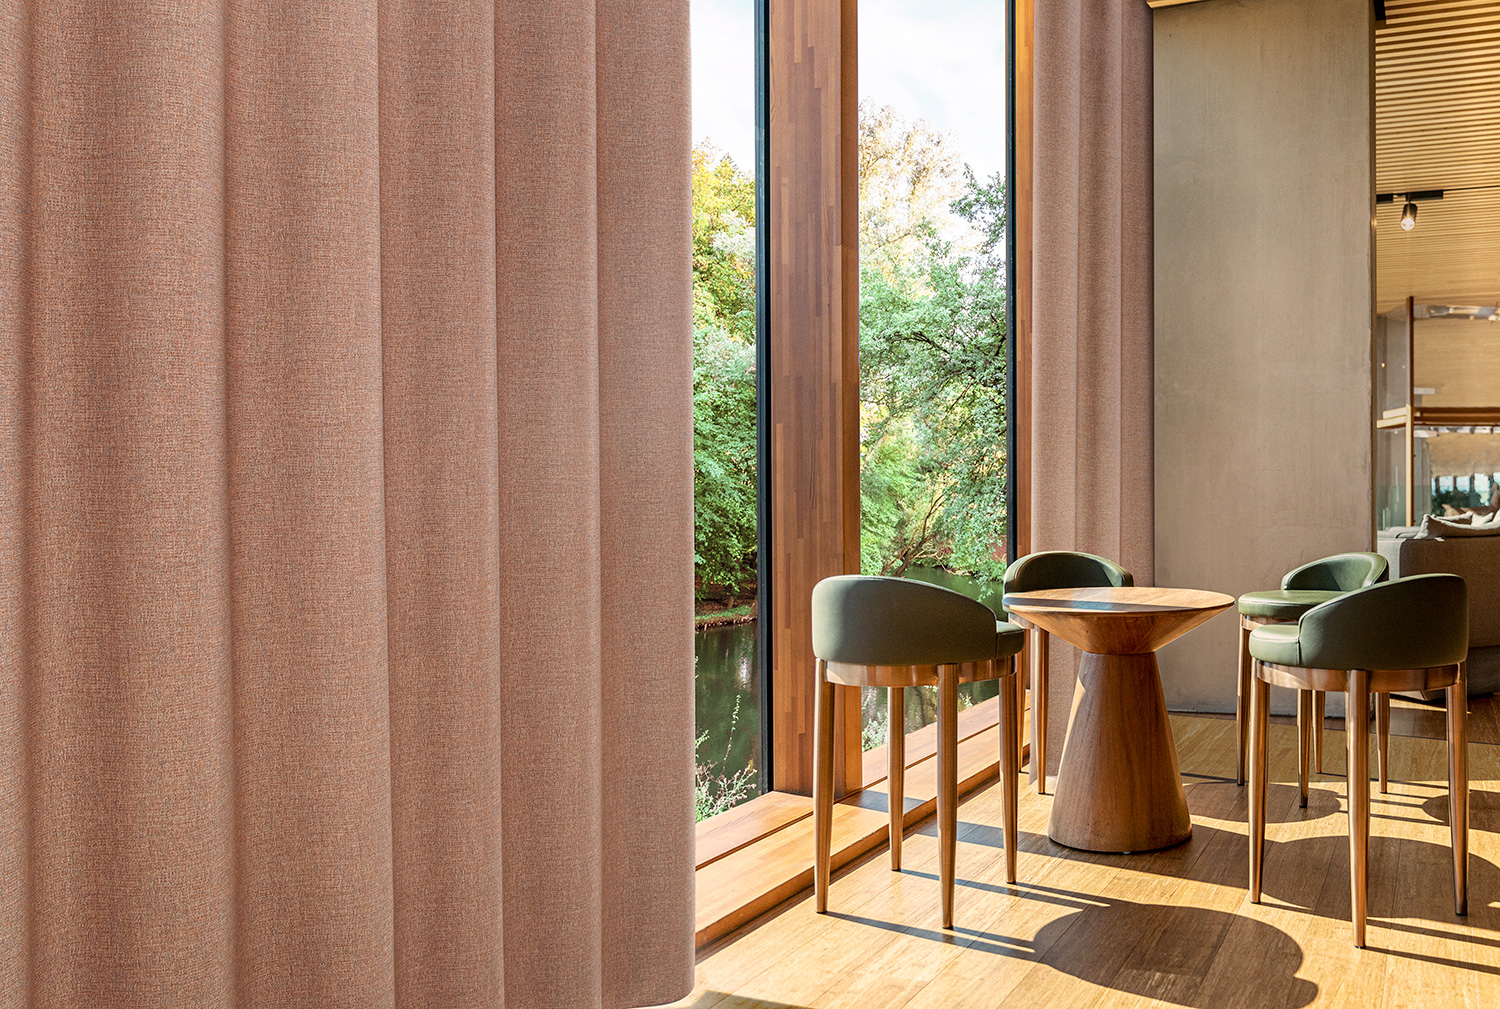 Vescom presents hygienic and human-centric curtains